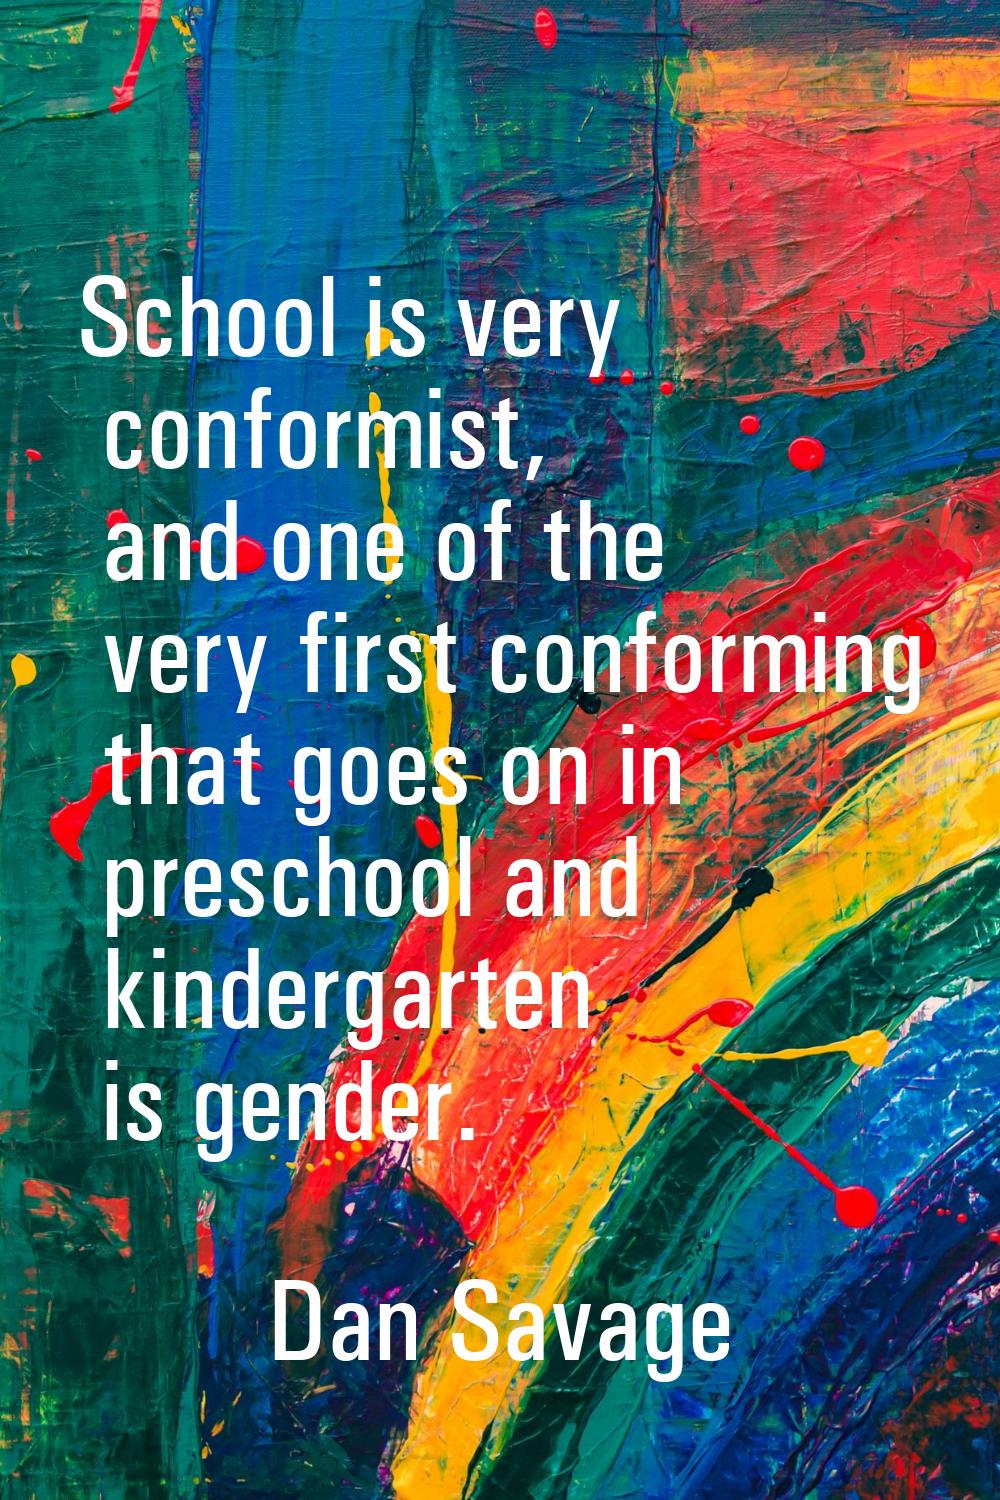 School is very conformist, and one of the very first conforming that goes on in preschool and kinde